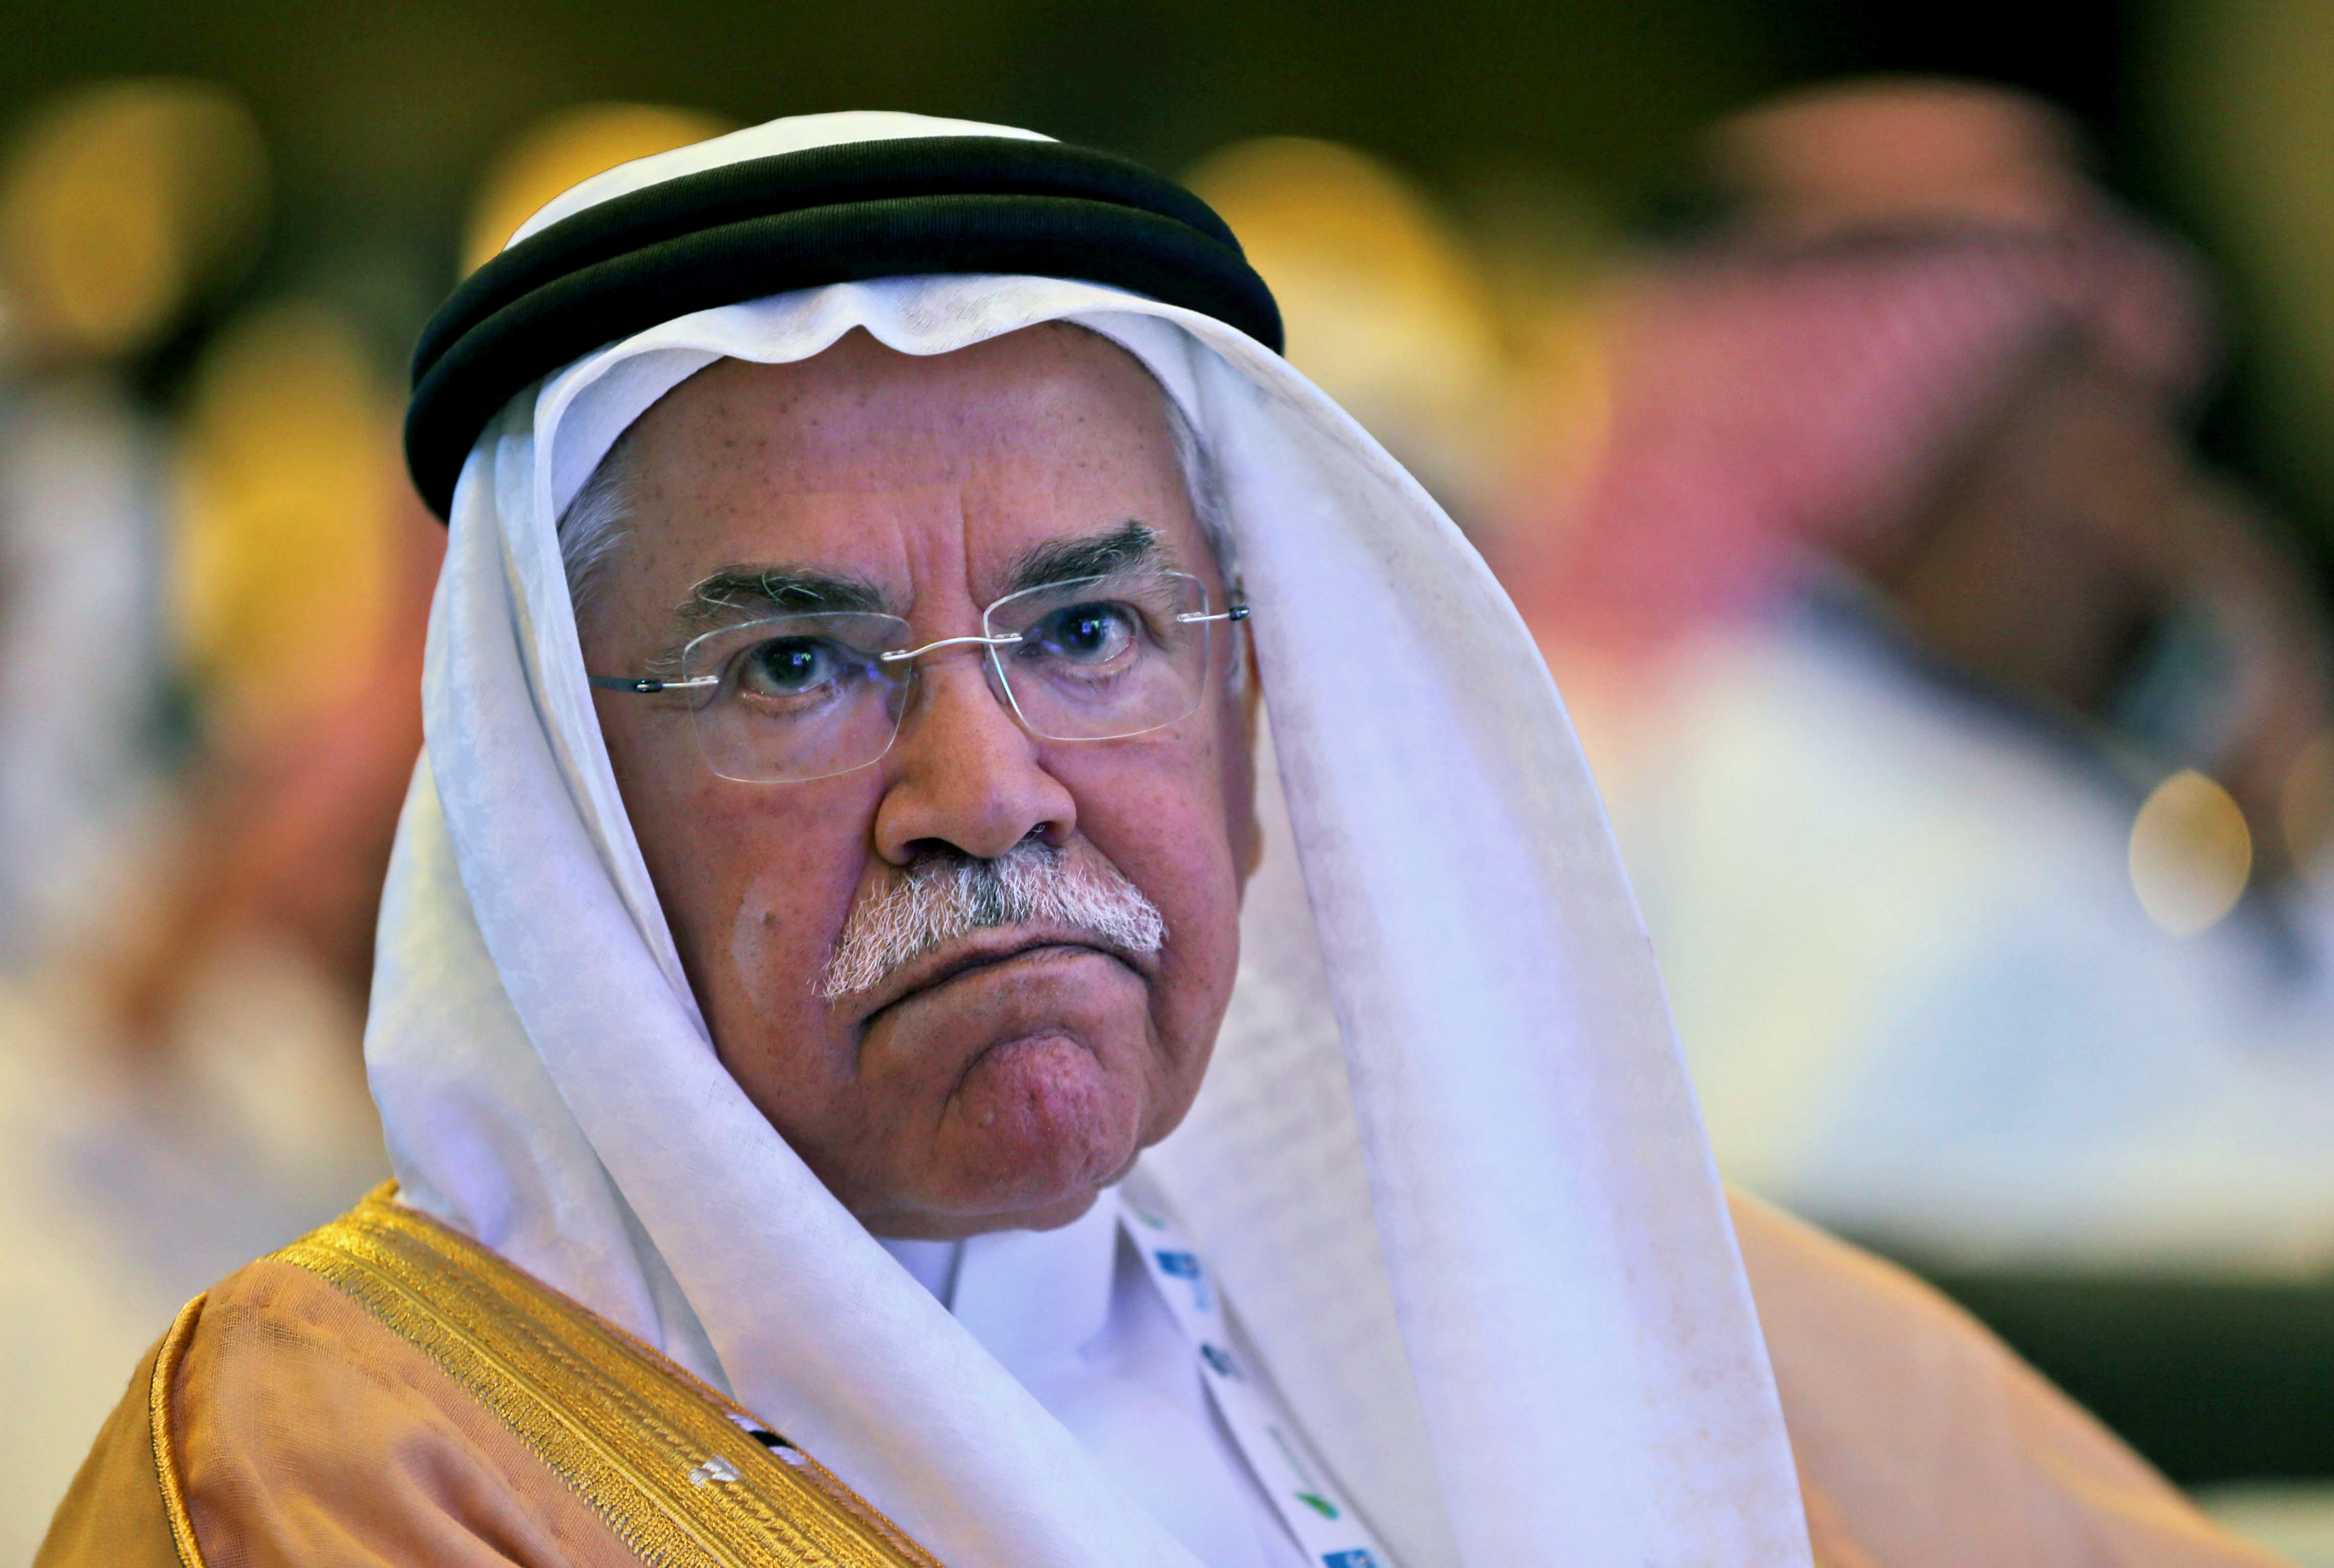 Saudi Arabia's Minister of Petroleum and Mineral Resources Ali al-Naimi attends the opening day of 10th Arab Energy Conference in Abu Dhabi on Dec. 21, 2014 (Kamran Jebreili—AP)